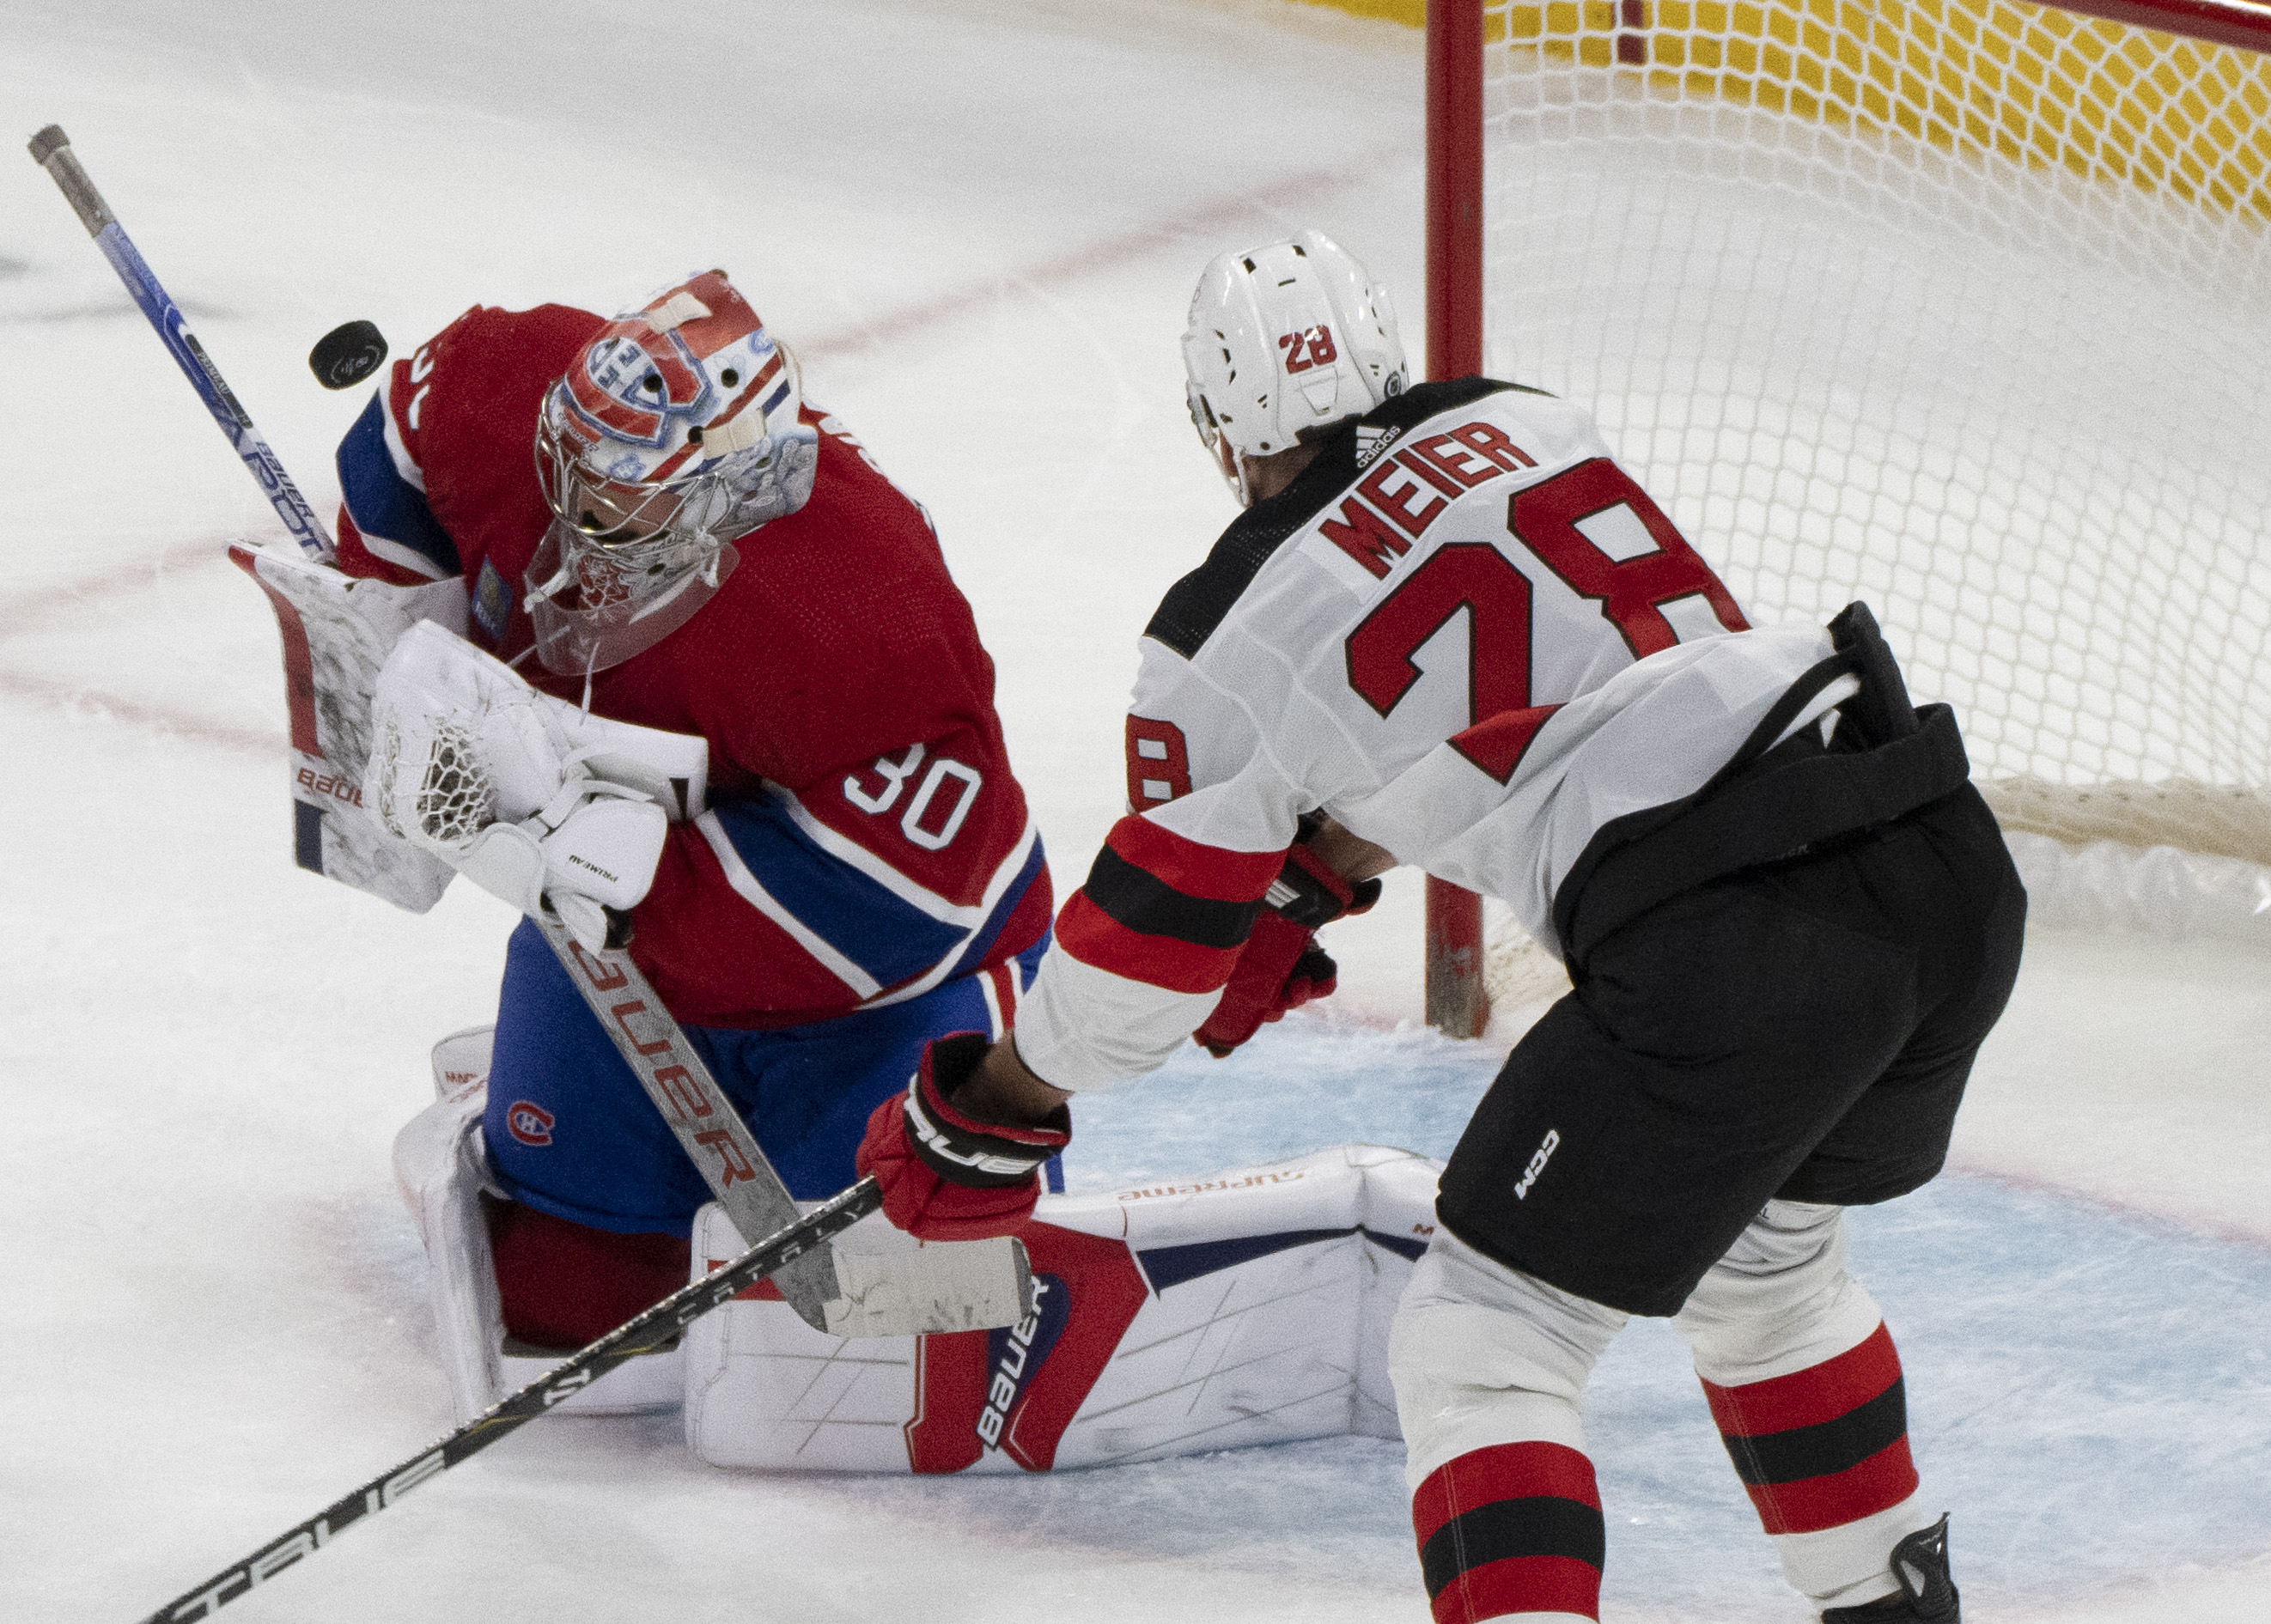 Call of the Wilde: After win against Buffalo, Habs brought down by New Jersey Devils 5-2